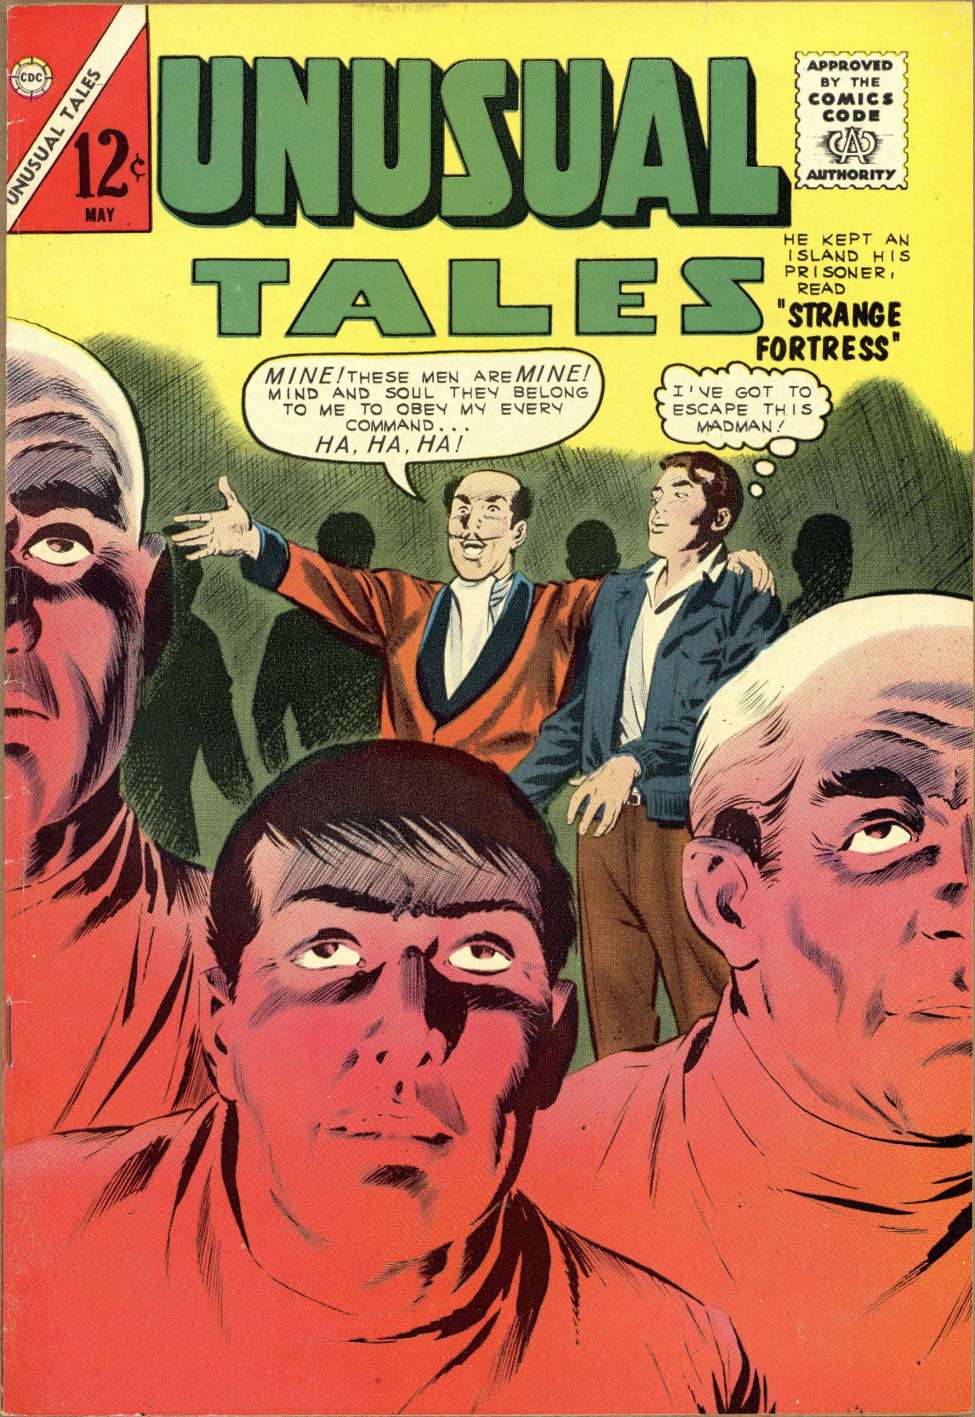 Book Cover For Unusual Tales 39 - Version 2